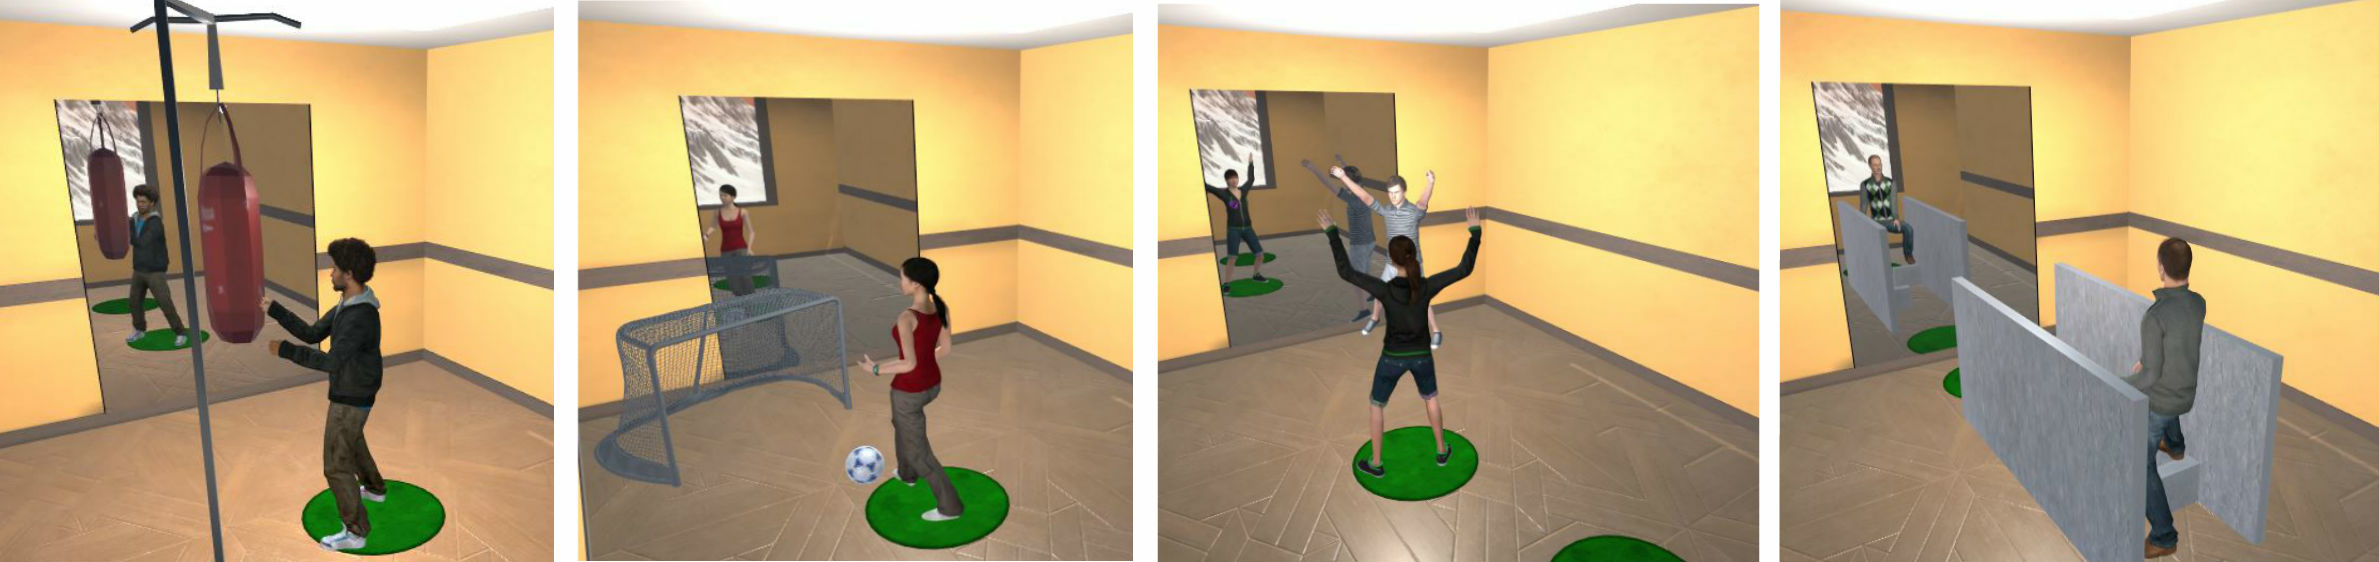 The four tasks implemented in the subjective matching experiment with the avatar's appearance at maximum level of realism. From left to right: Punching, Soccer, Fitness and Walking.